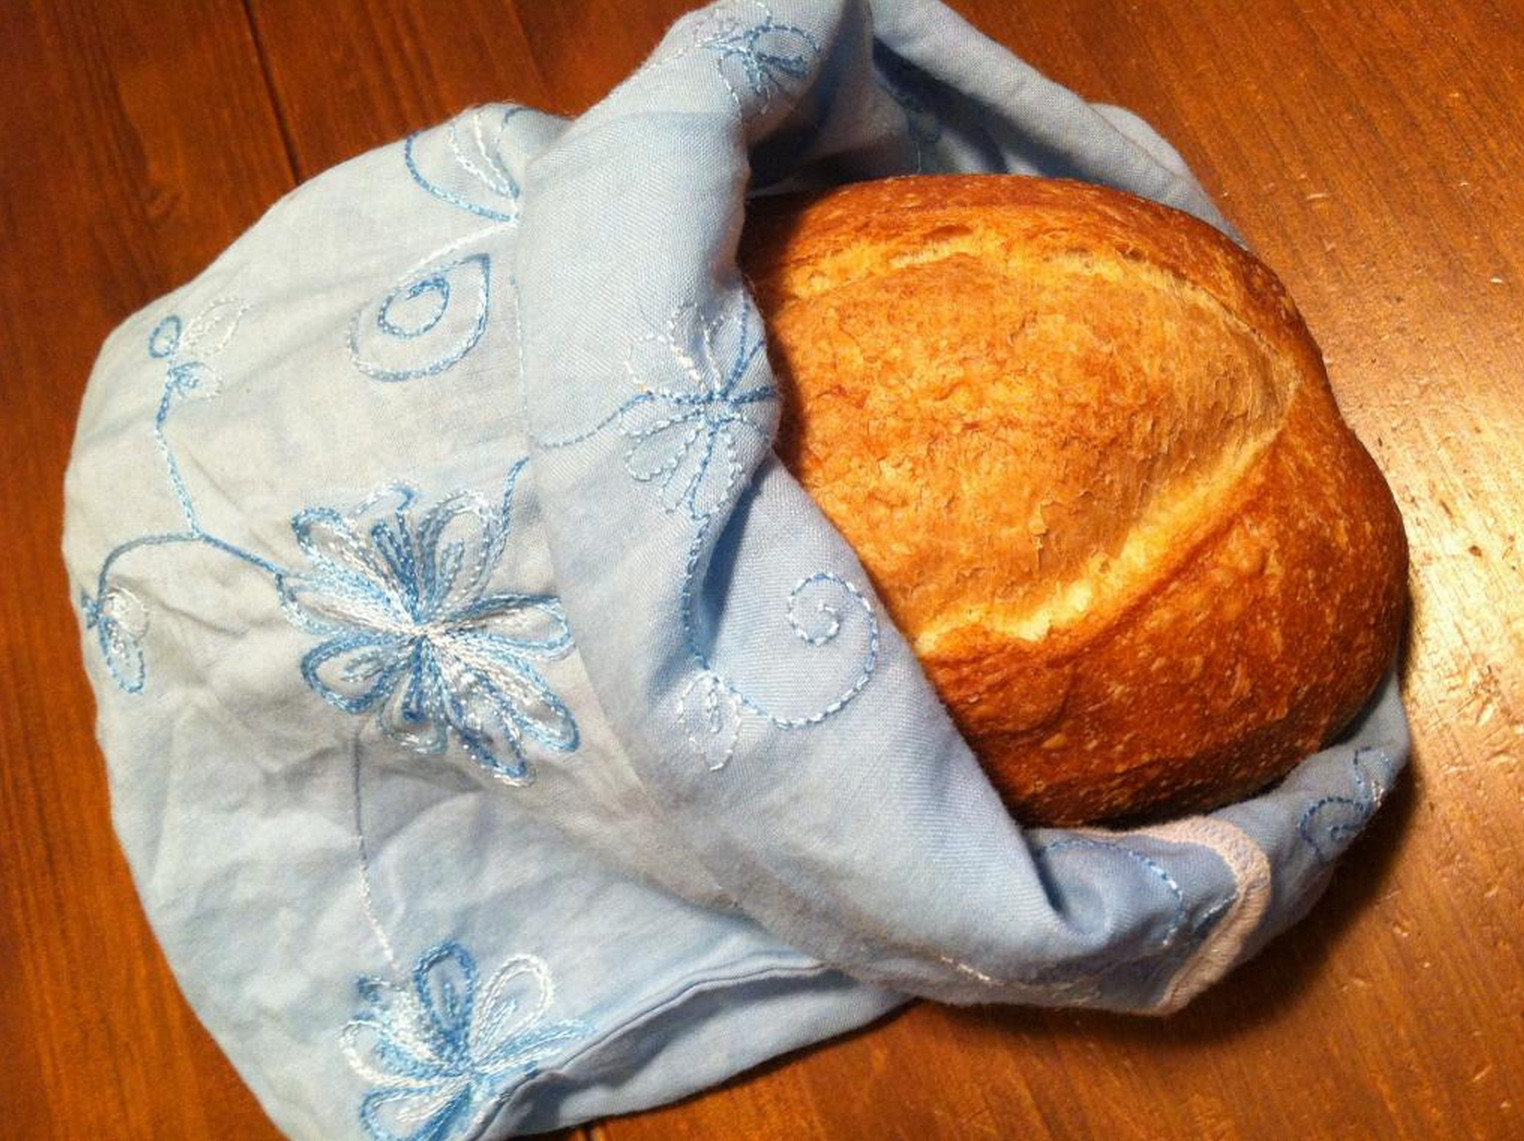 bread purchased in a reusable cloth bag